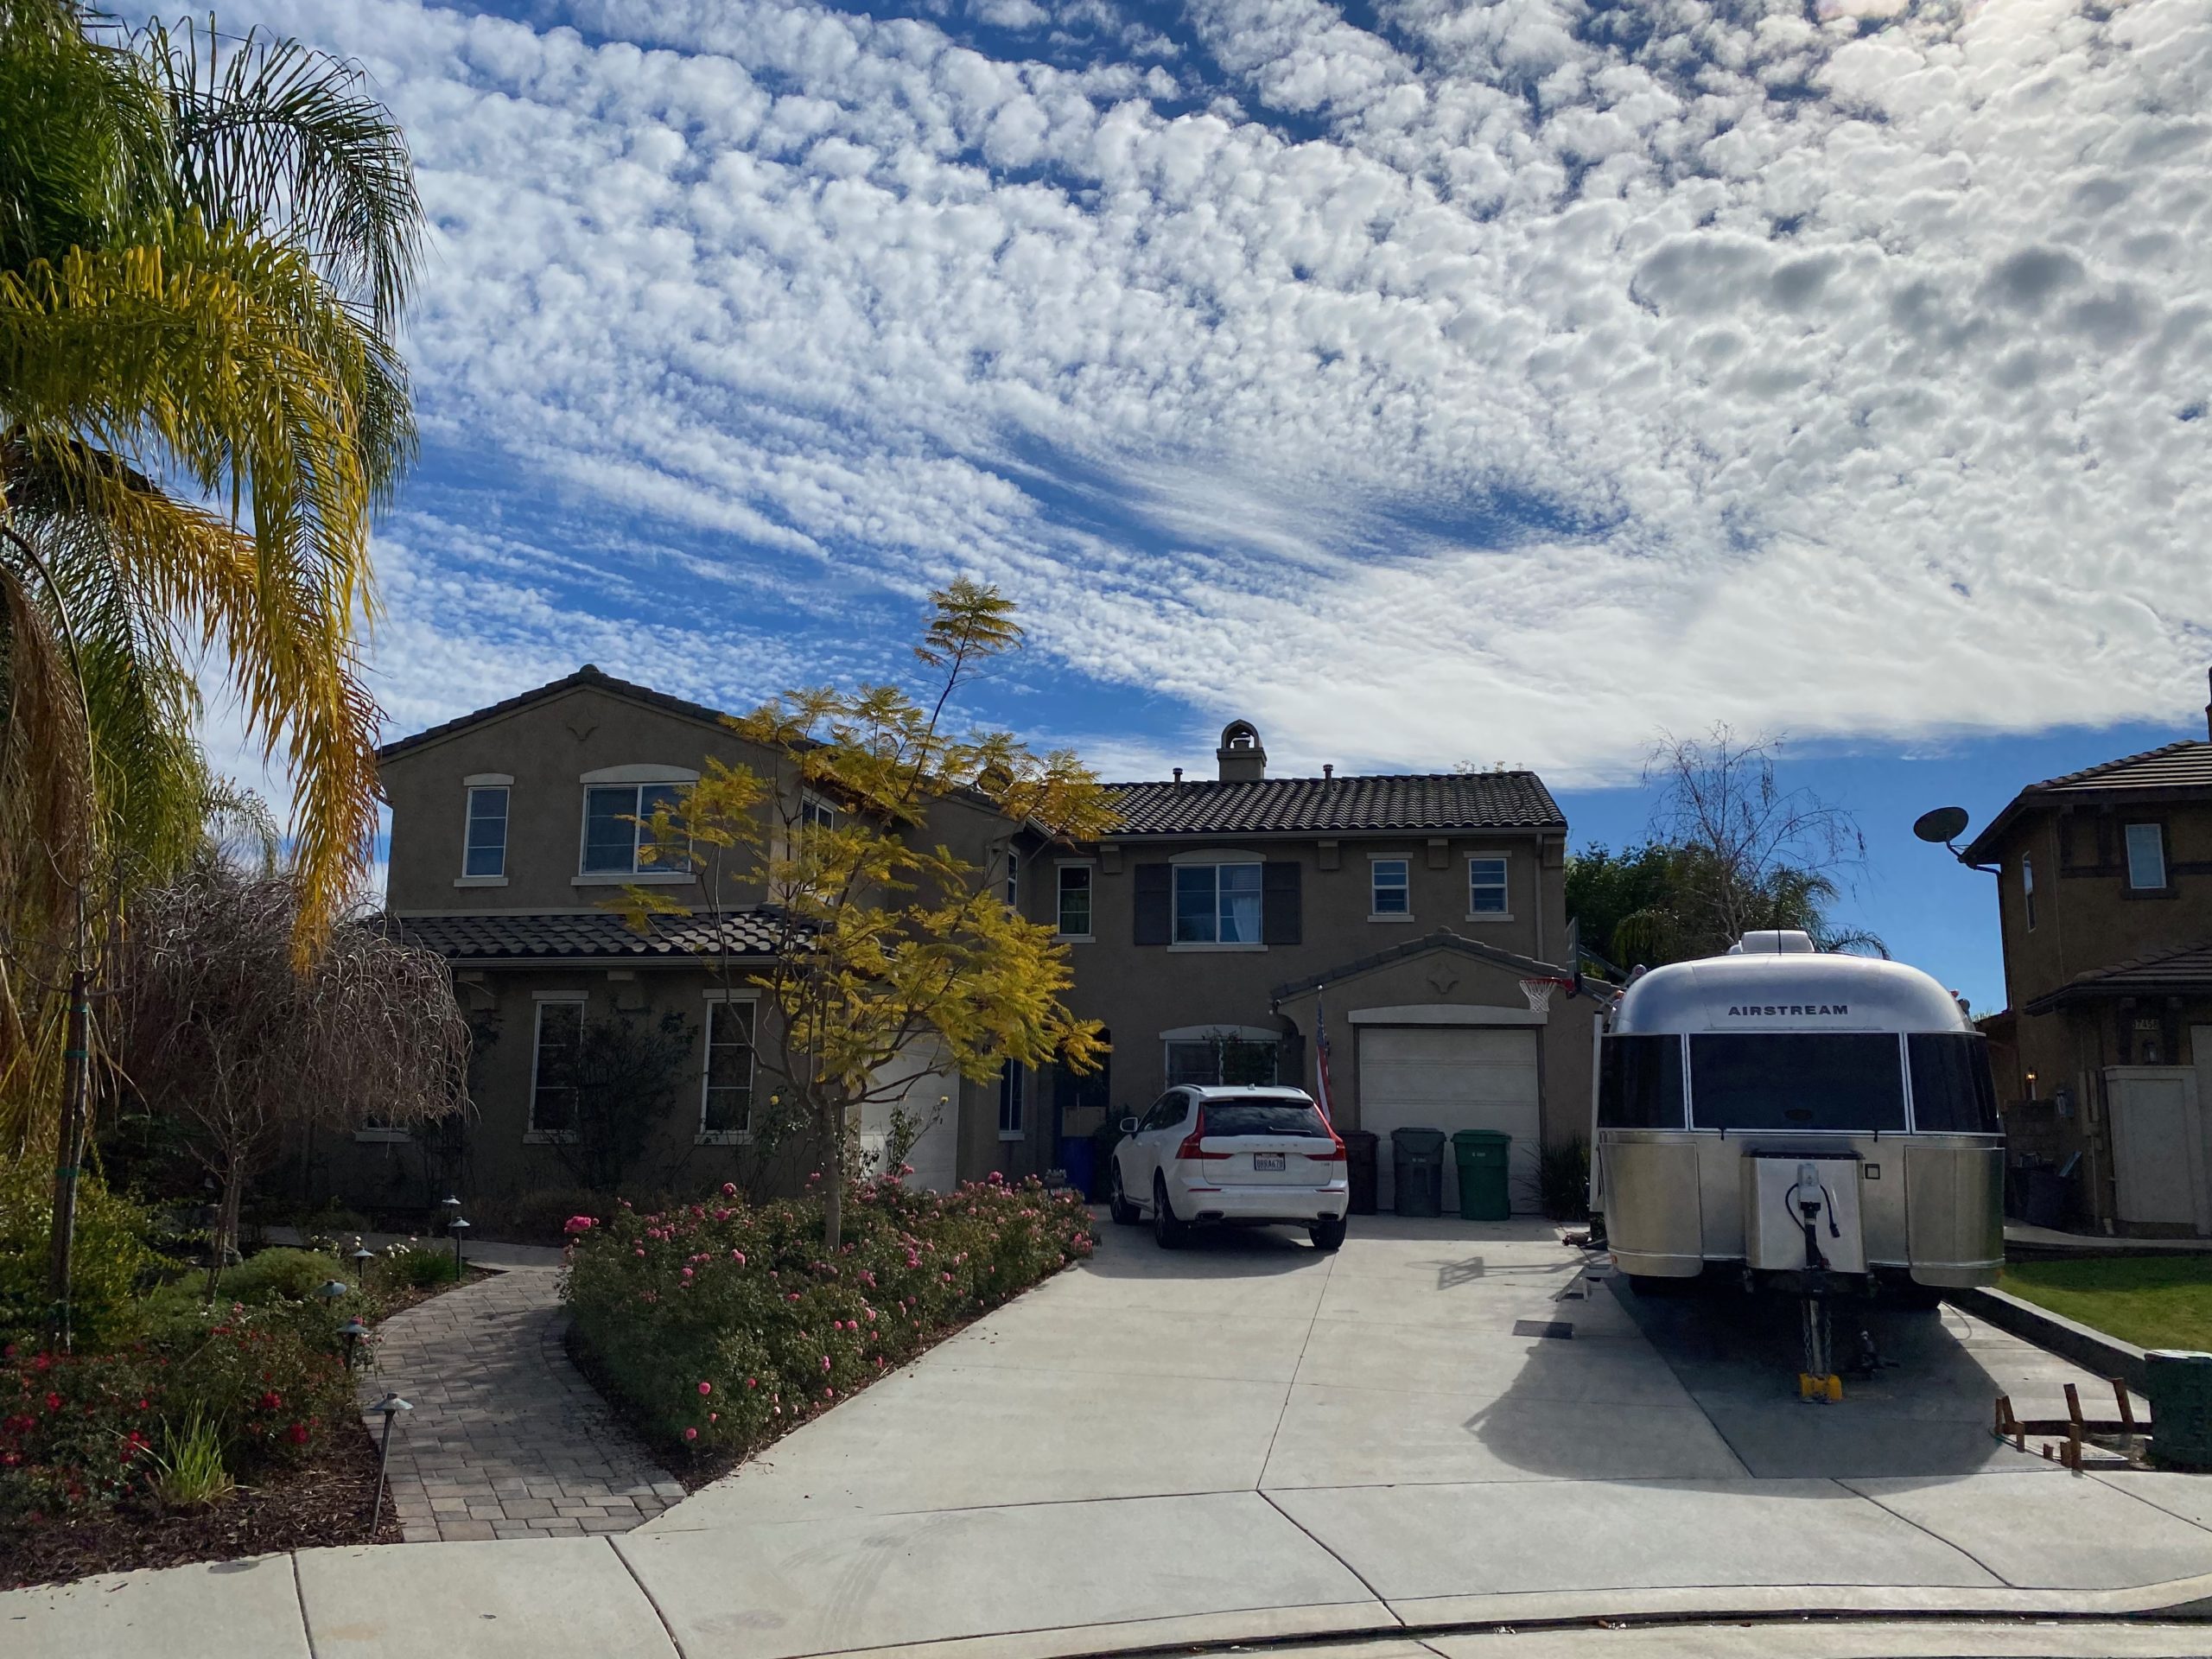 Airstream parked in front yard of a home using a driveway extension and curb.